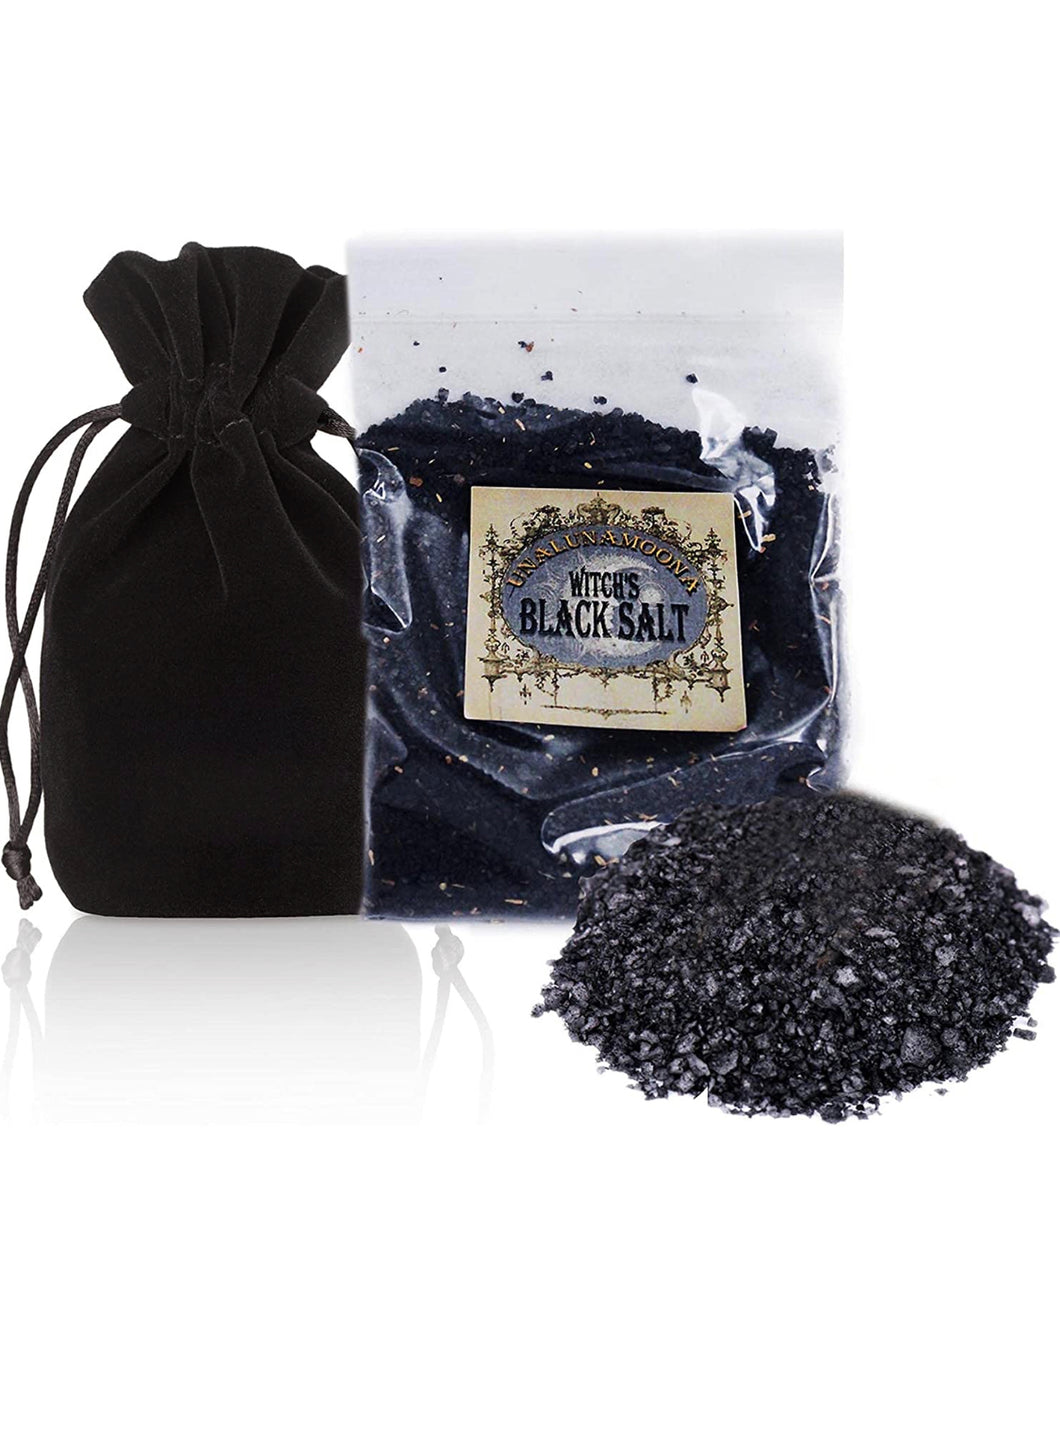 UnaLunaMoona Wicca Black Salt Refill | Black Salt for Protection Charged Using Dark  Moon Energy Witchcraft kit